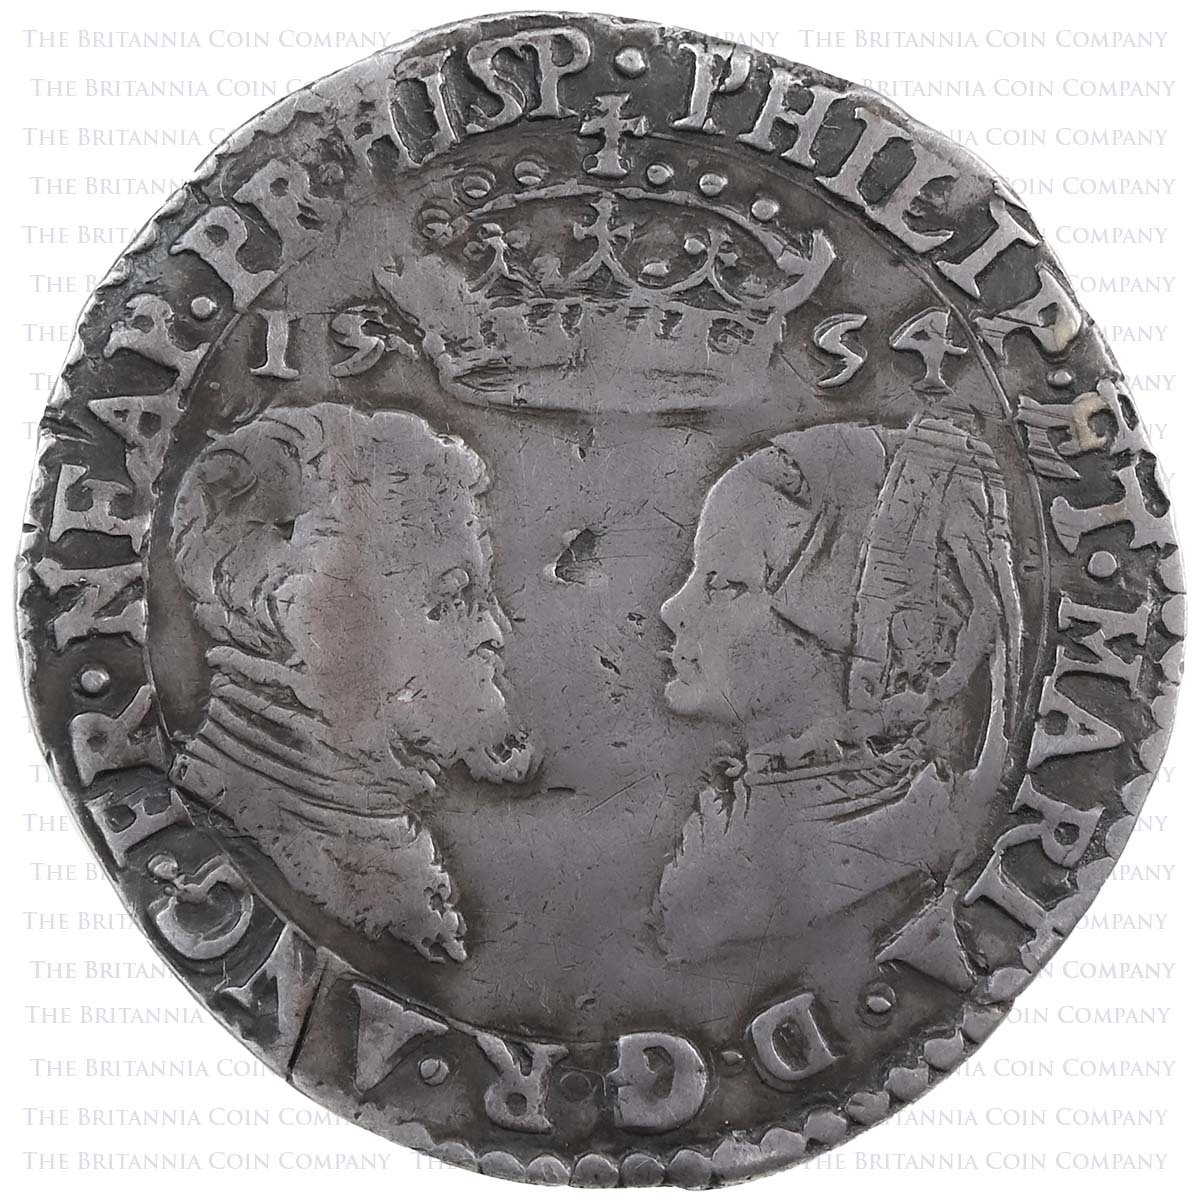 1554 Philip II And Mary I Hammered Silver Sixpence Coin Full Titles Obverse